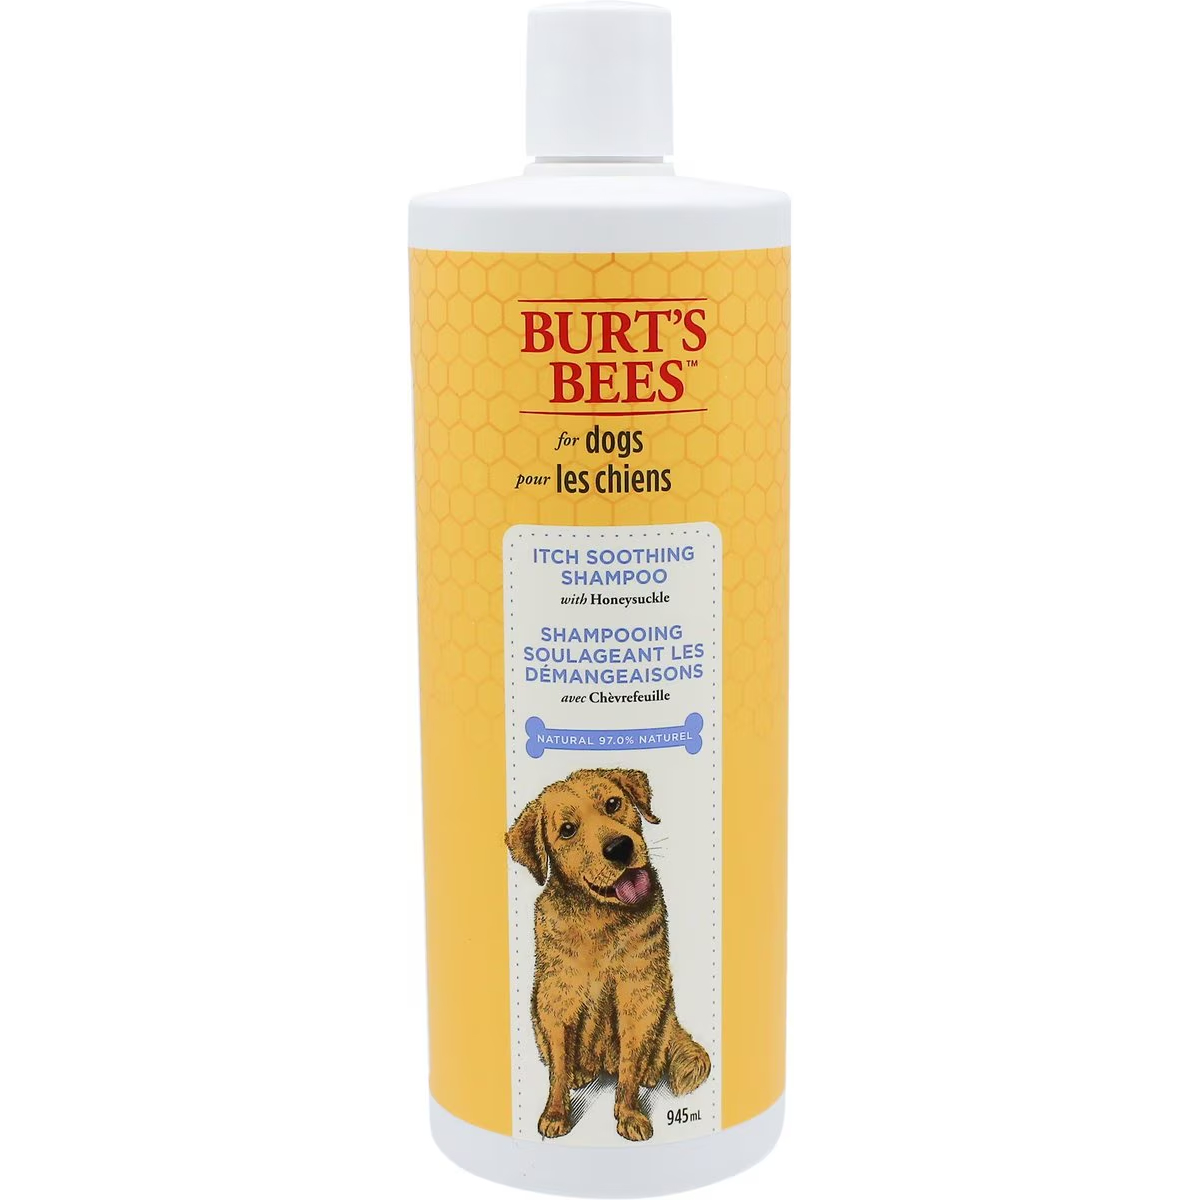 Burt’s Bees Itch Soothing Shampoo